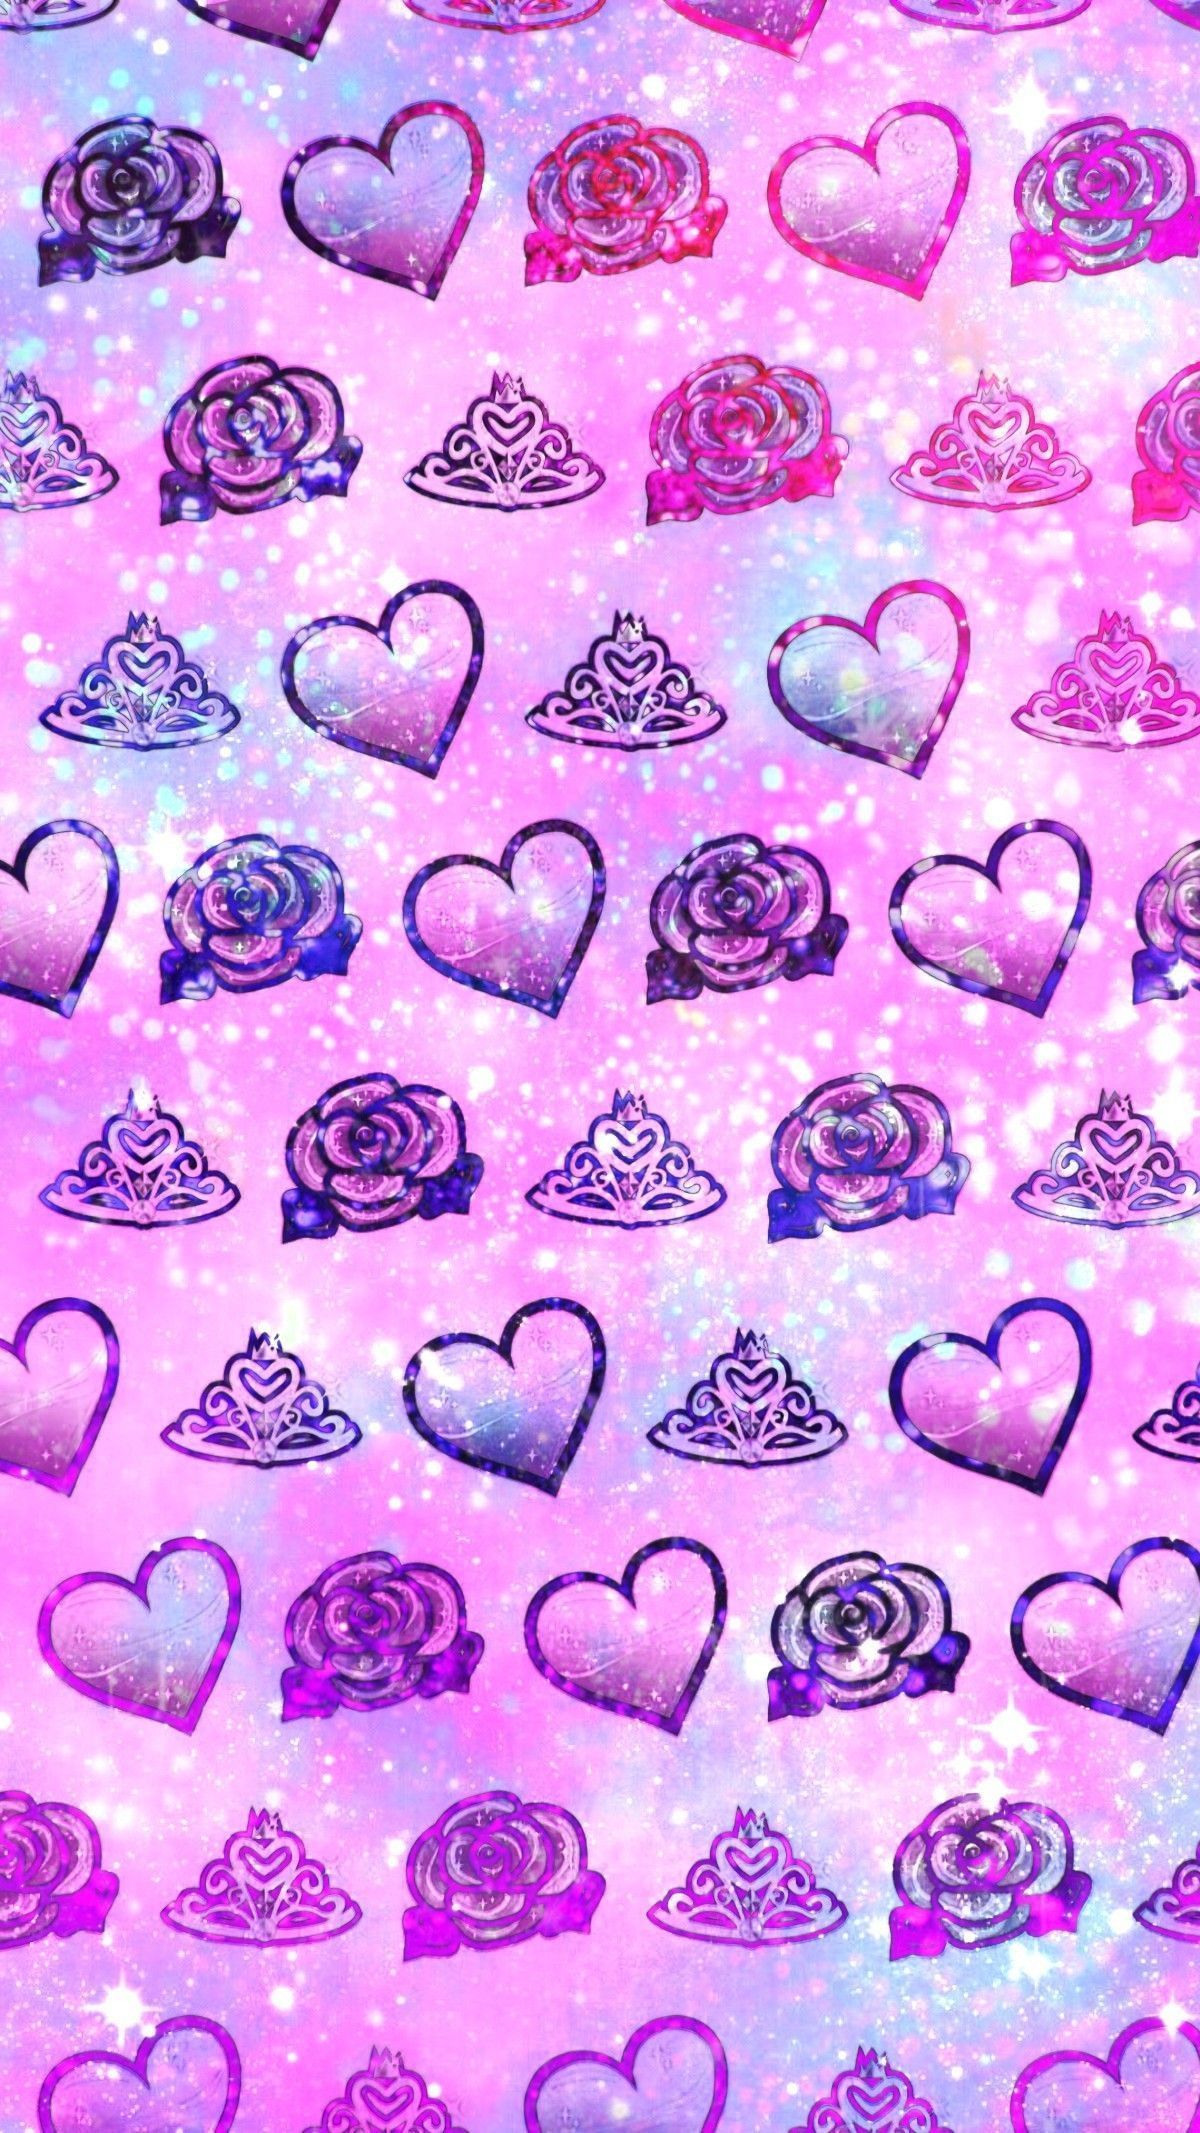 Girly wallpaper for your phone, galaxy, hearts, crowns, roses - Emoji